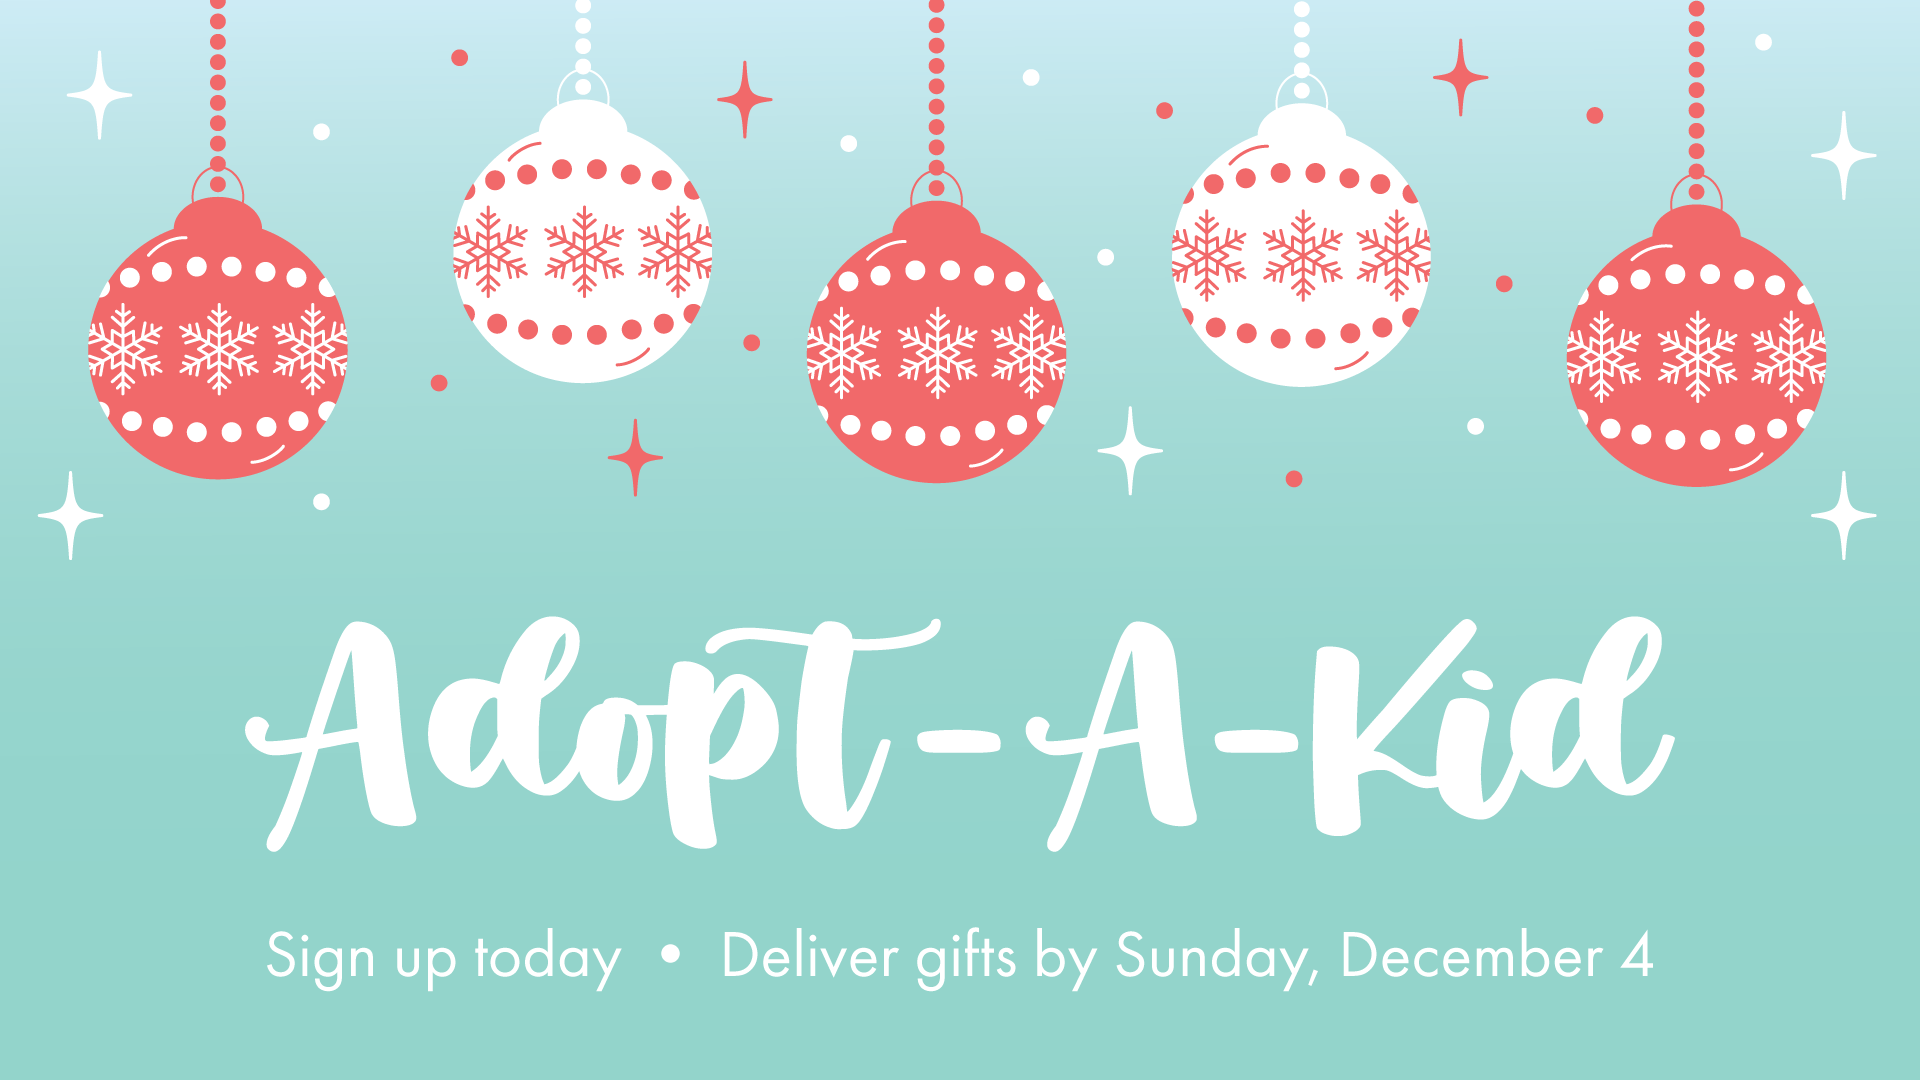 Adopt-A-Kid Collection